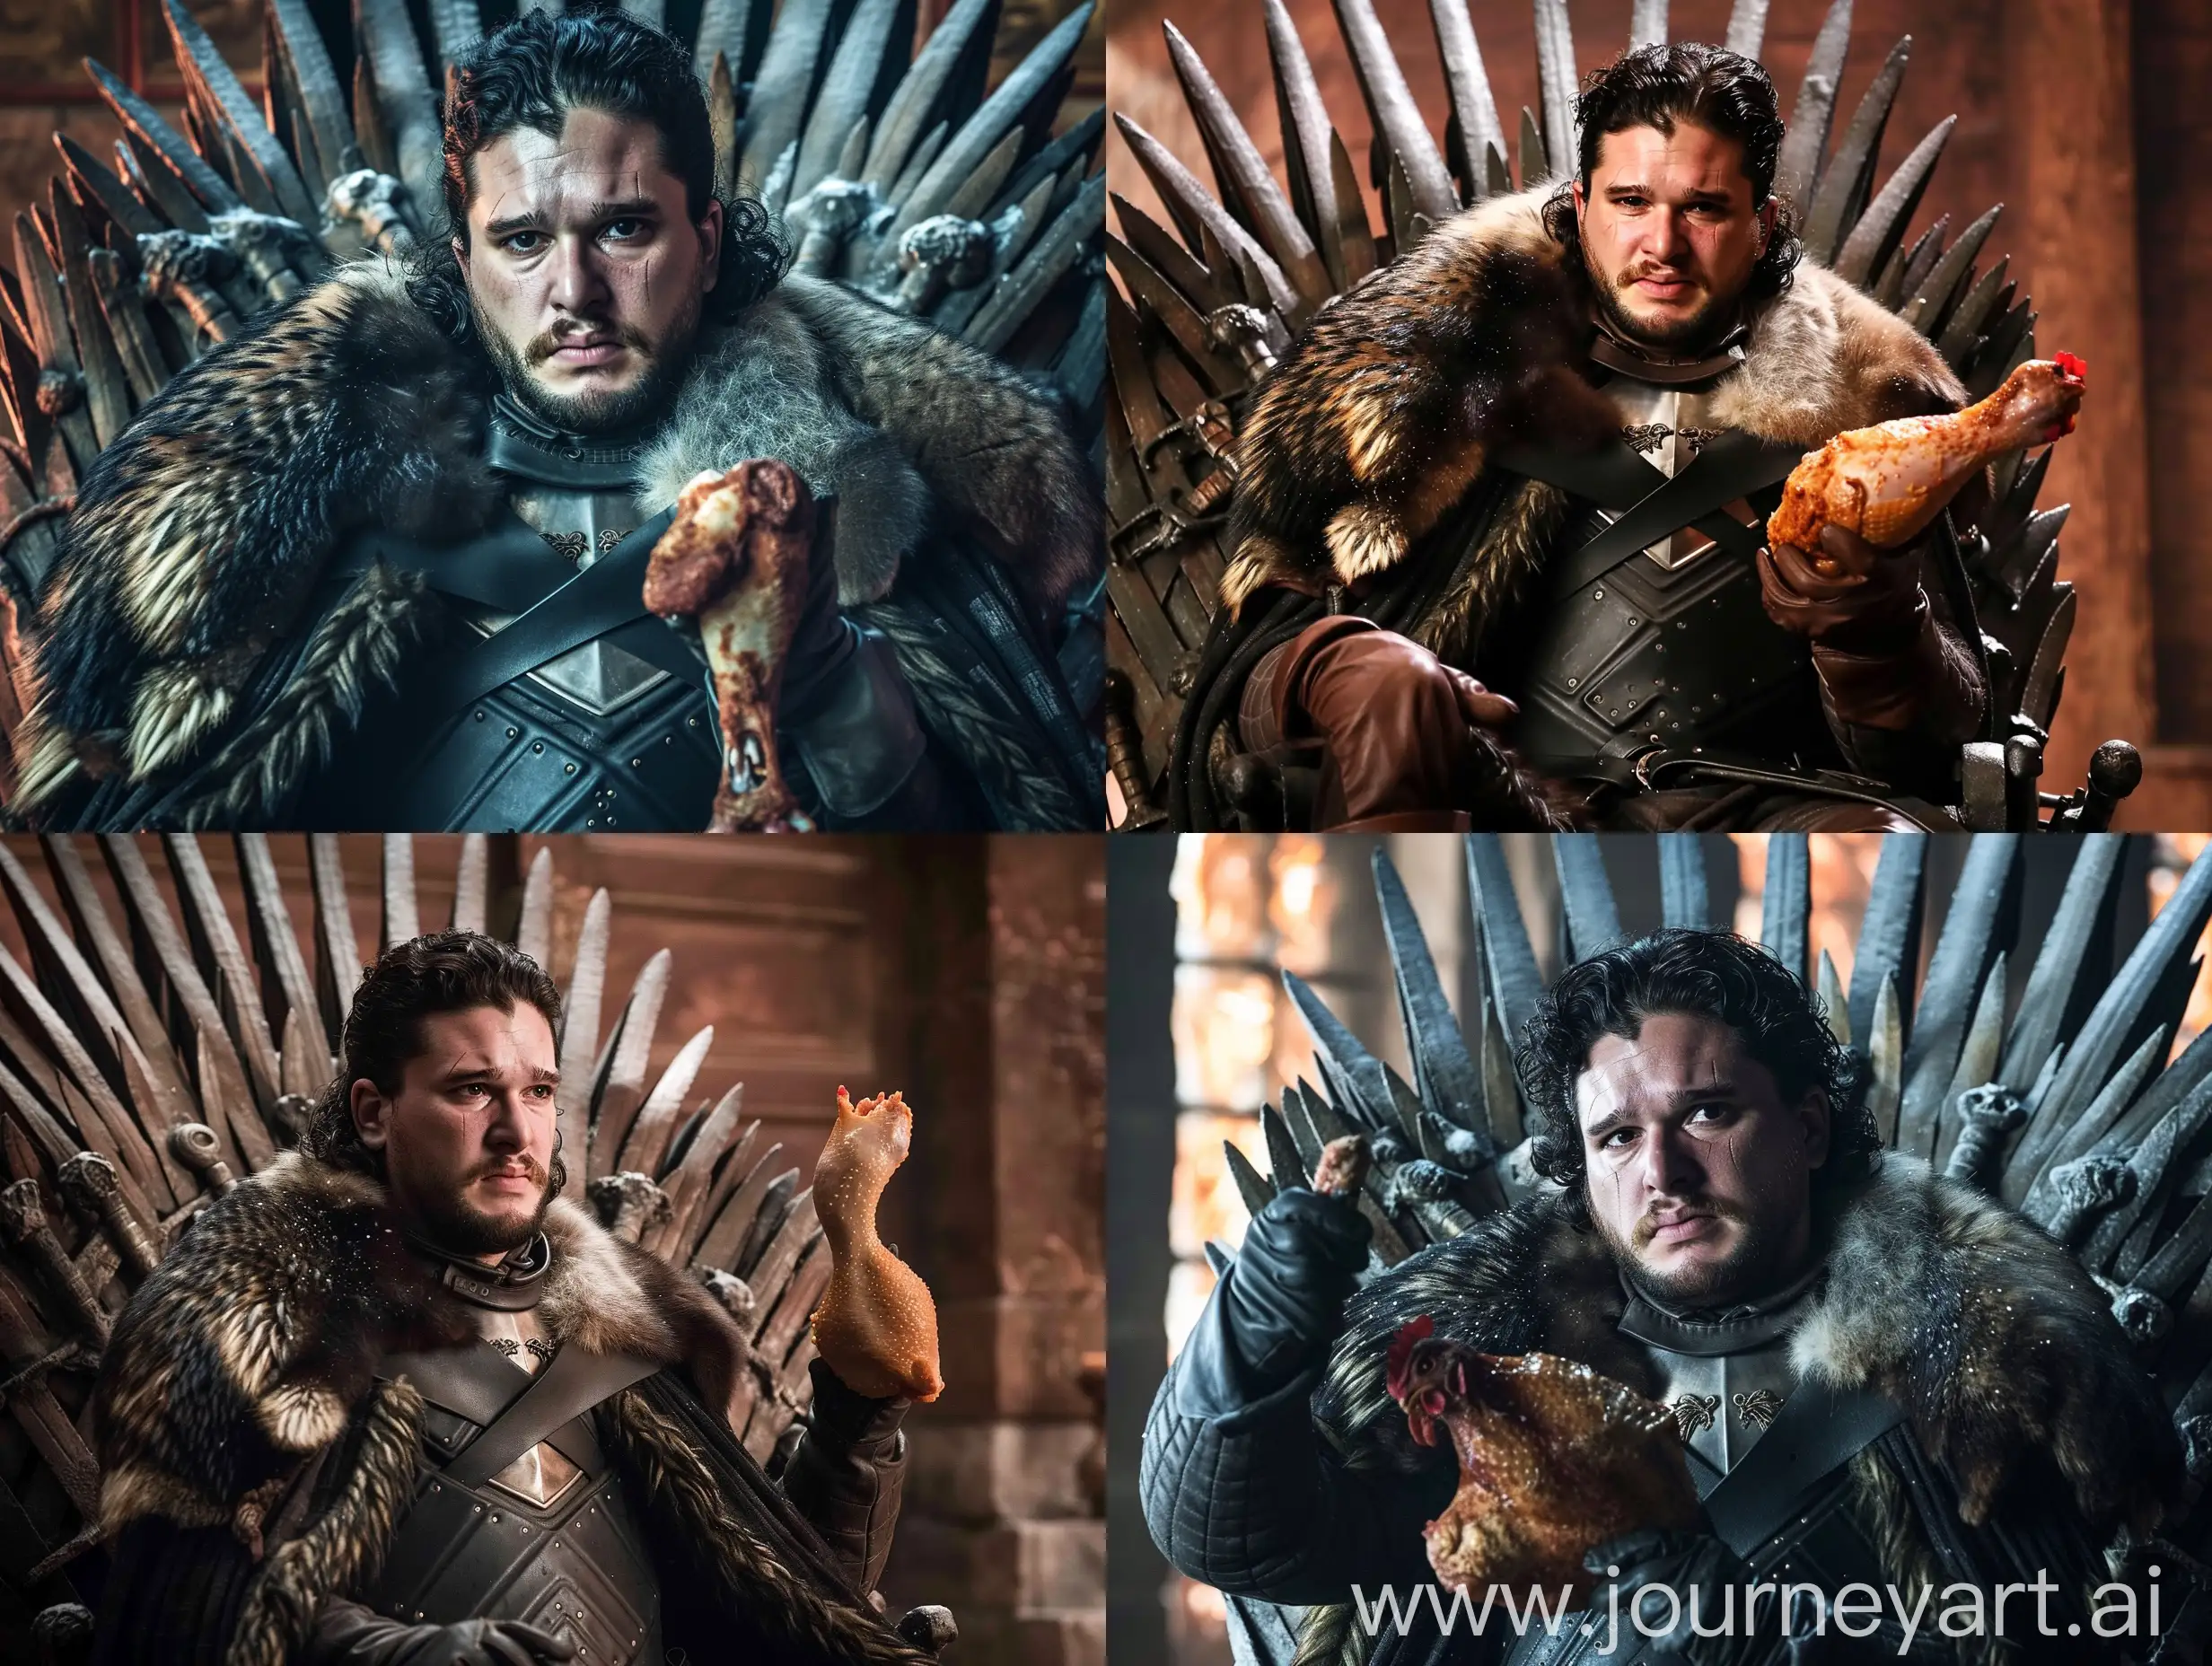 Jon Snow in the Game of Thrones series, Jon Snow is fat and has a fat face and body, Jon Snow is sitting on the iron throne, he has a chicken leg that is ready to eat in his right hand, Jon Snow is in Winterfell Palace in winter. He looks at the camera, Jon Snow has a grin on his face, the lighting is classic.